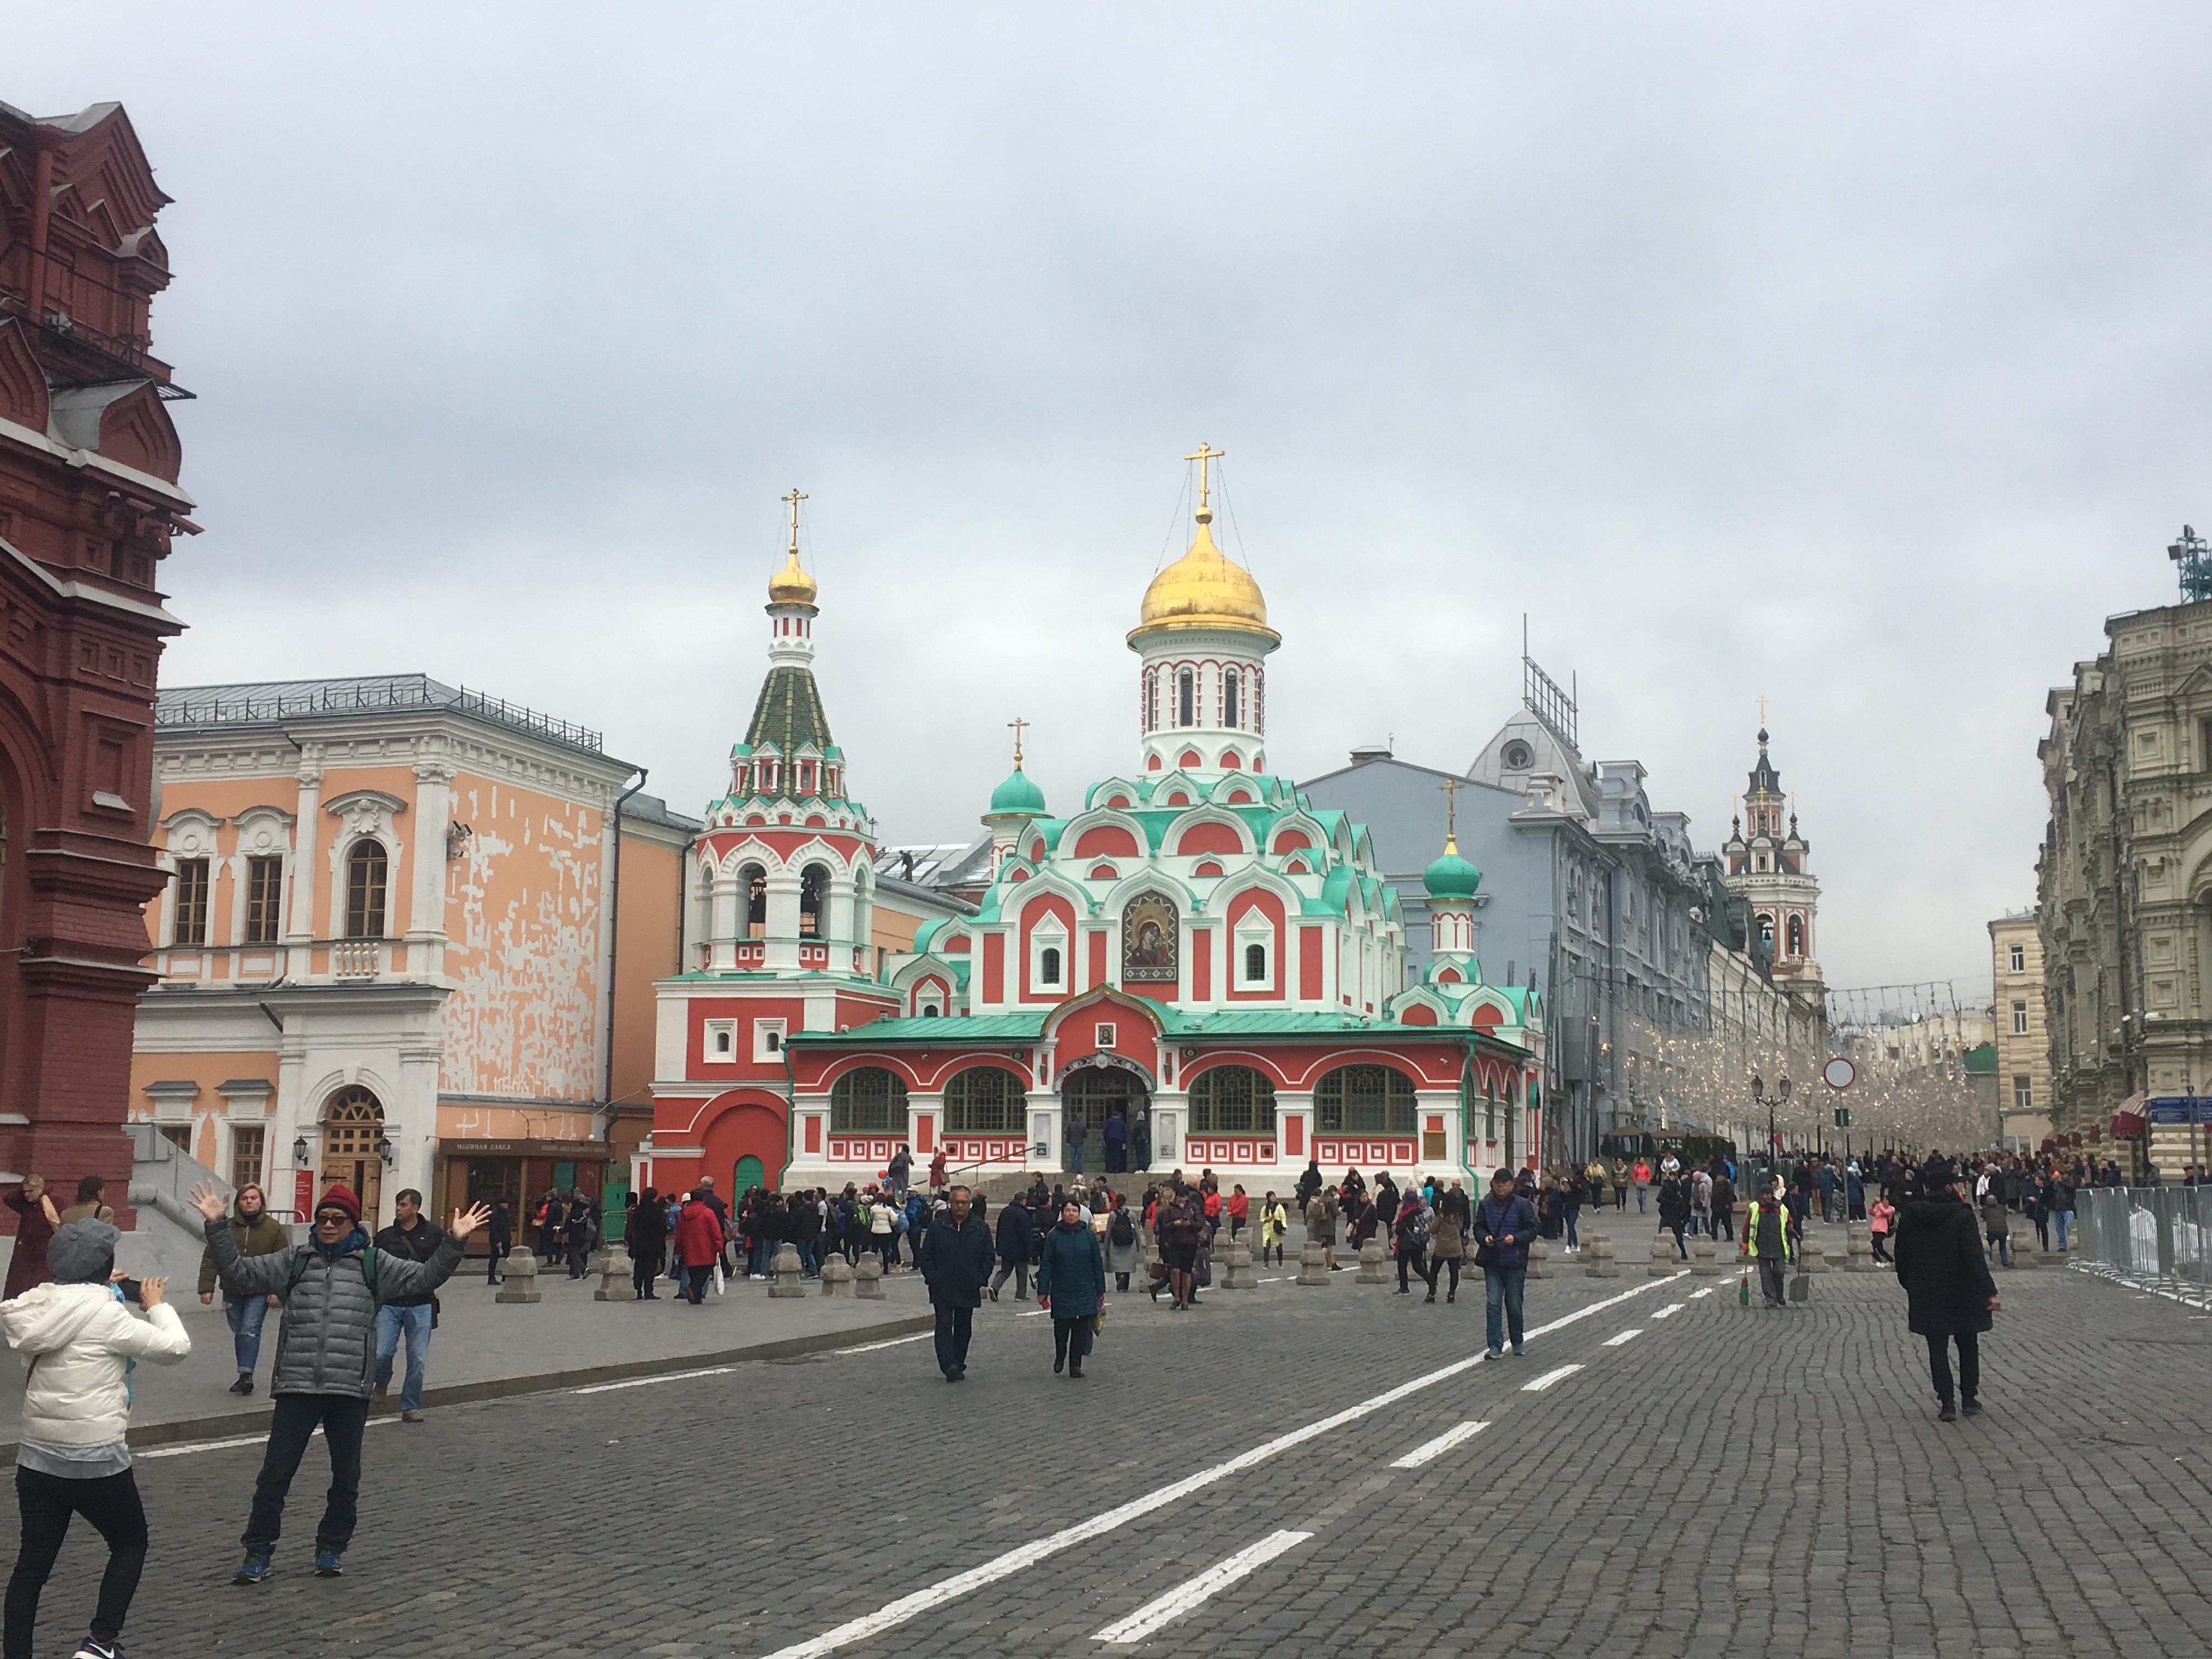 Kazan Cathedral next to sparkly decorations for GUM department store